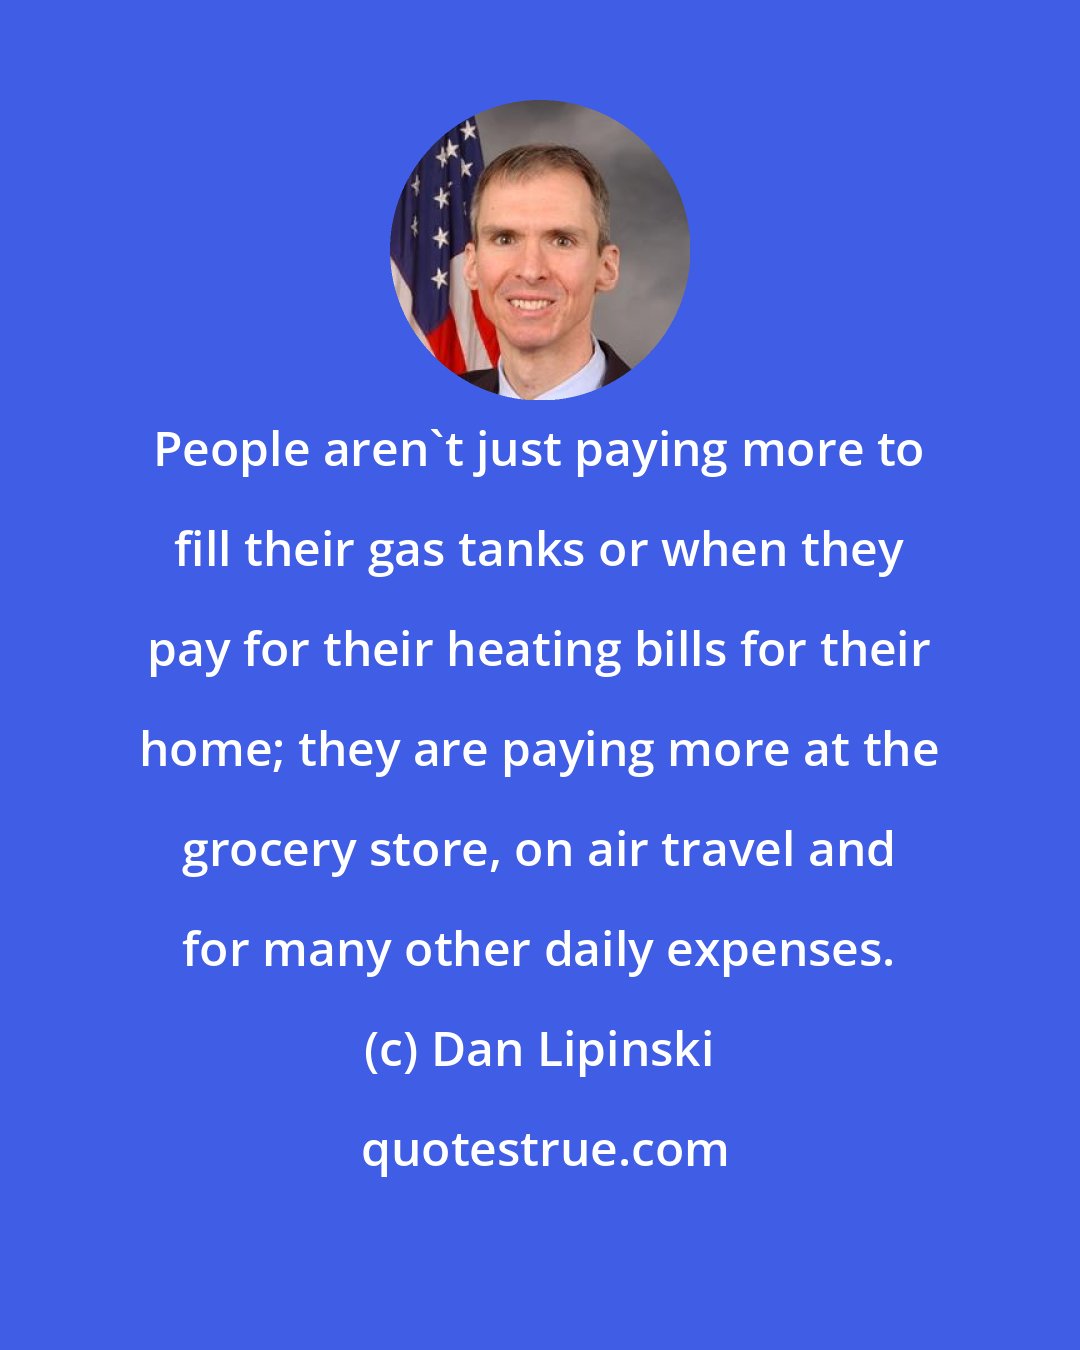 Dan Lipinski: People aren't just paying more to fill their gas tanks or when they pay for their heating bills for their home; they are paying more at the grocery store, on air travel and for many other daily expenses.